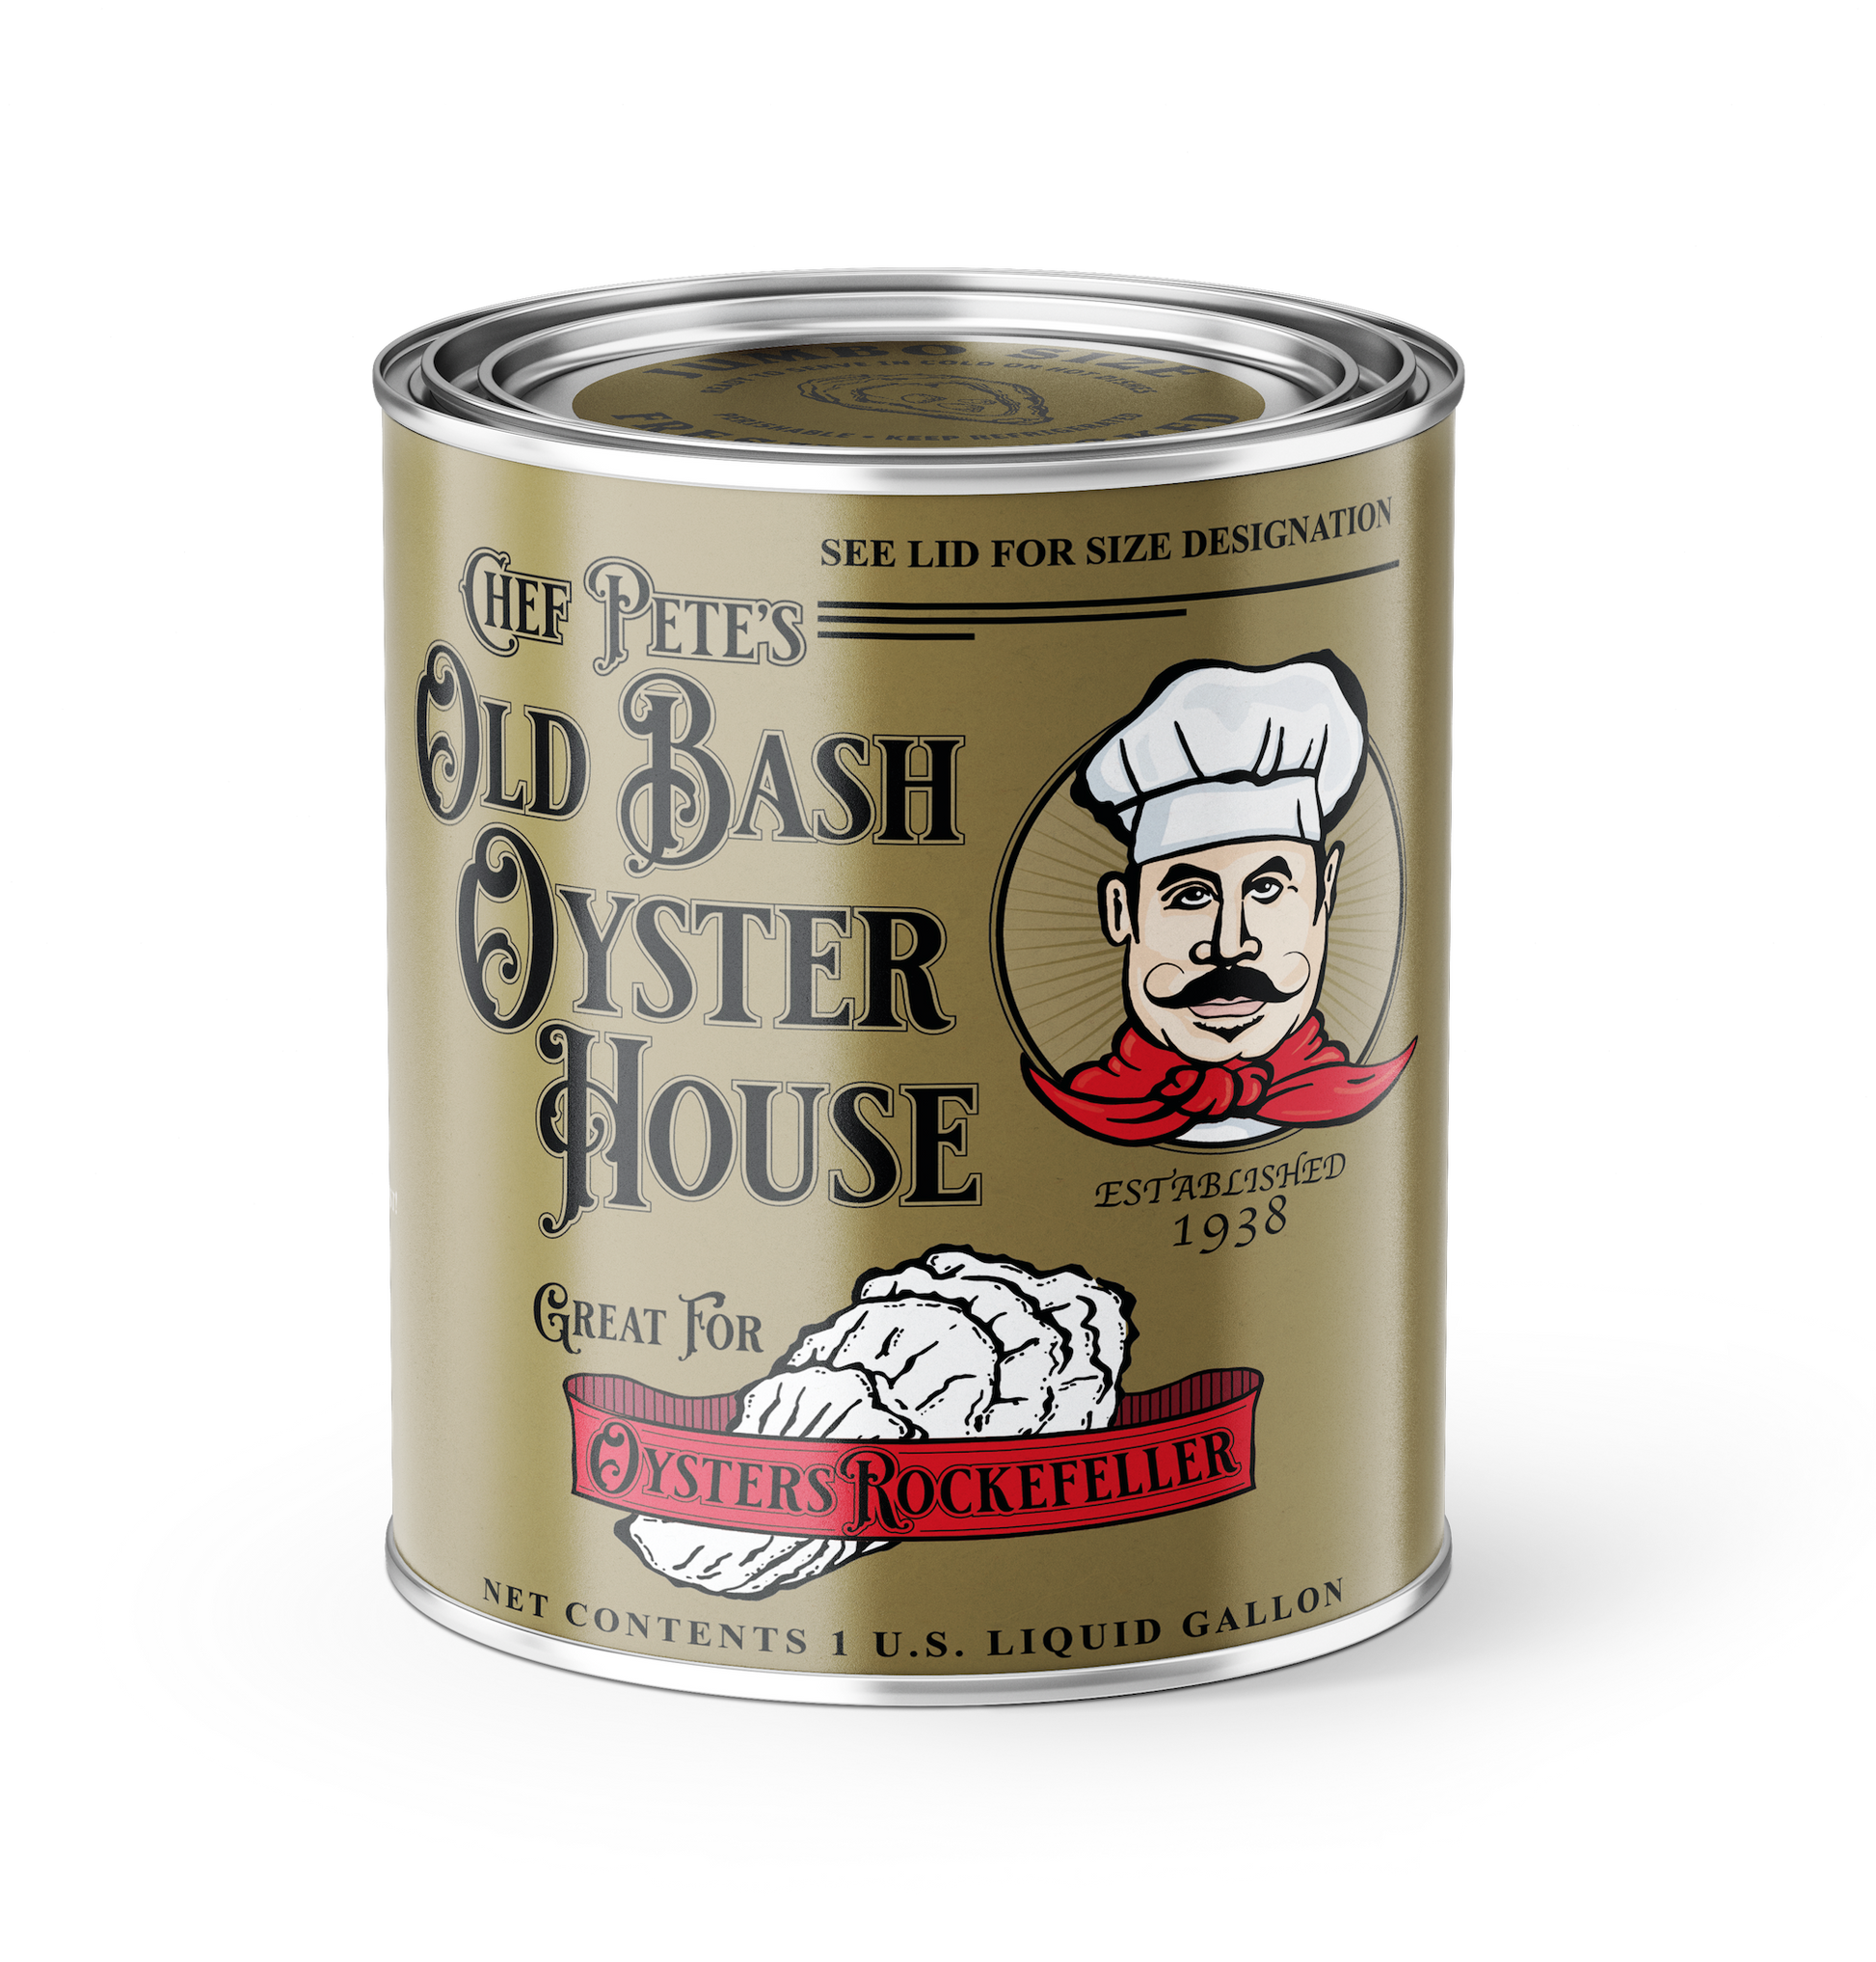 Vintage Old Bash House Point Oyster Candle